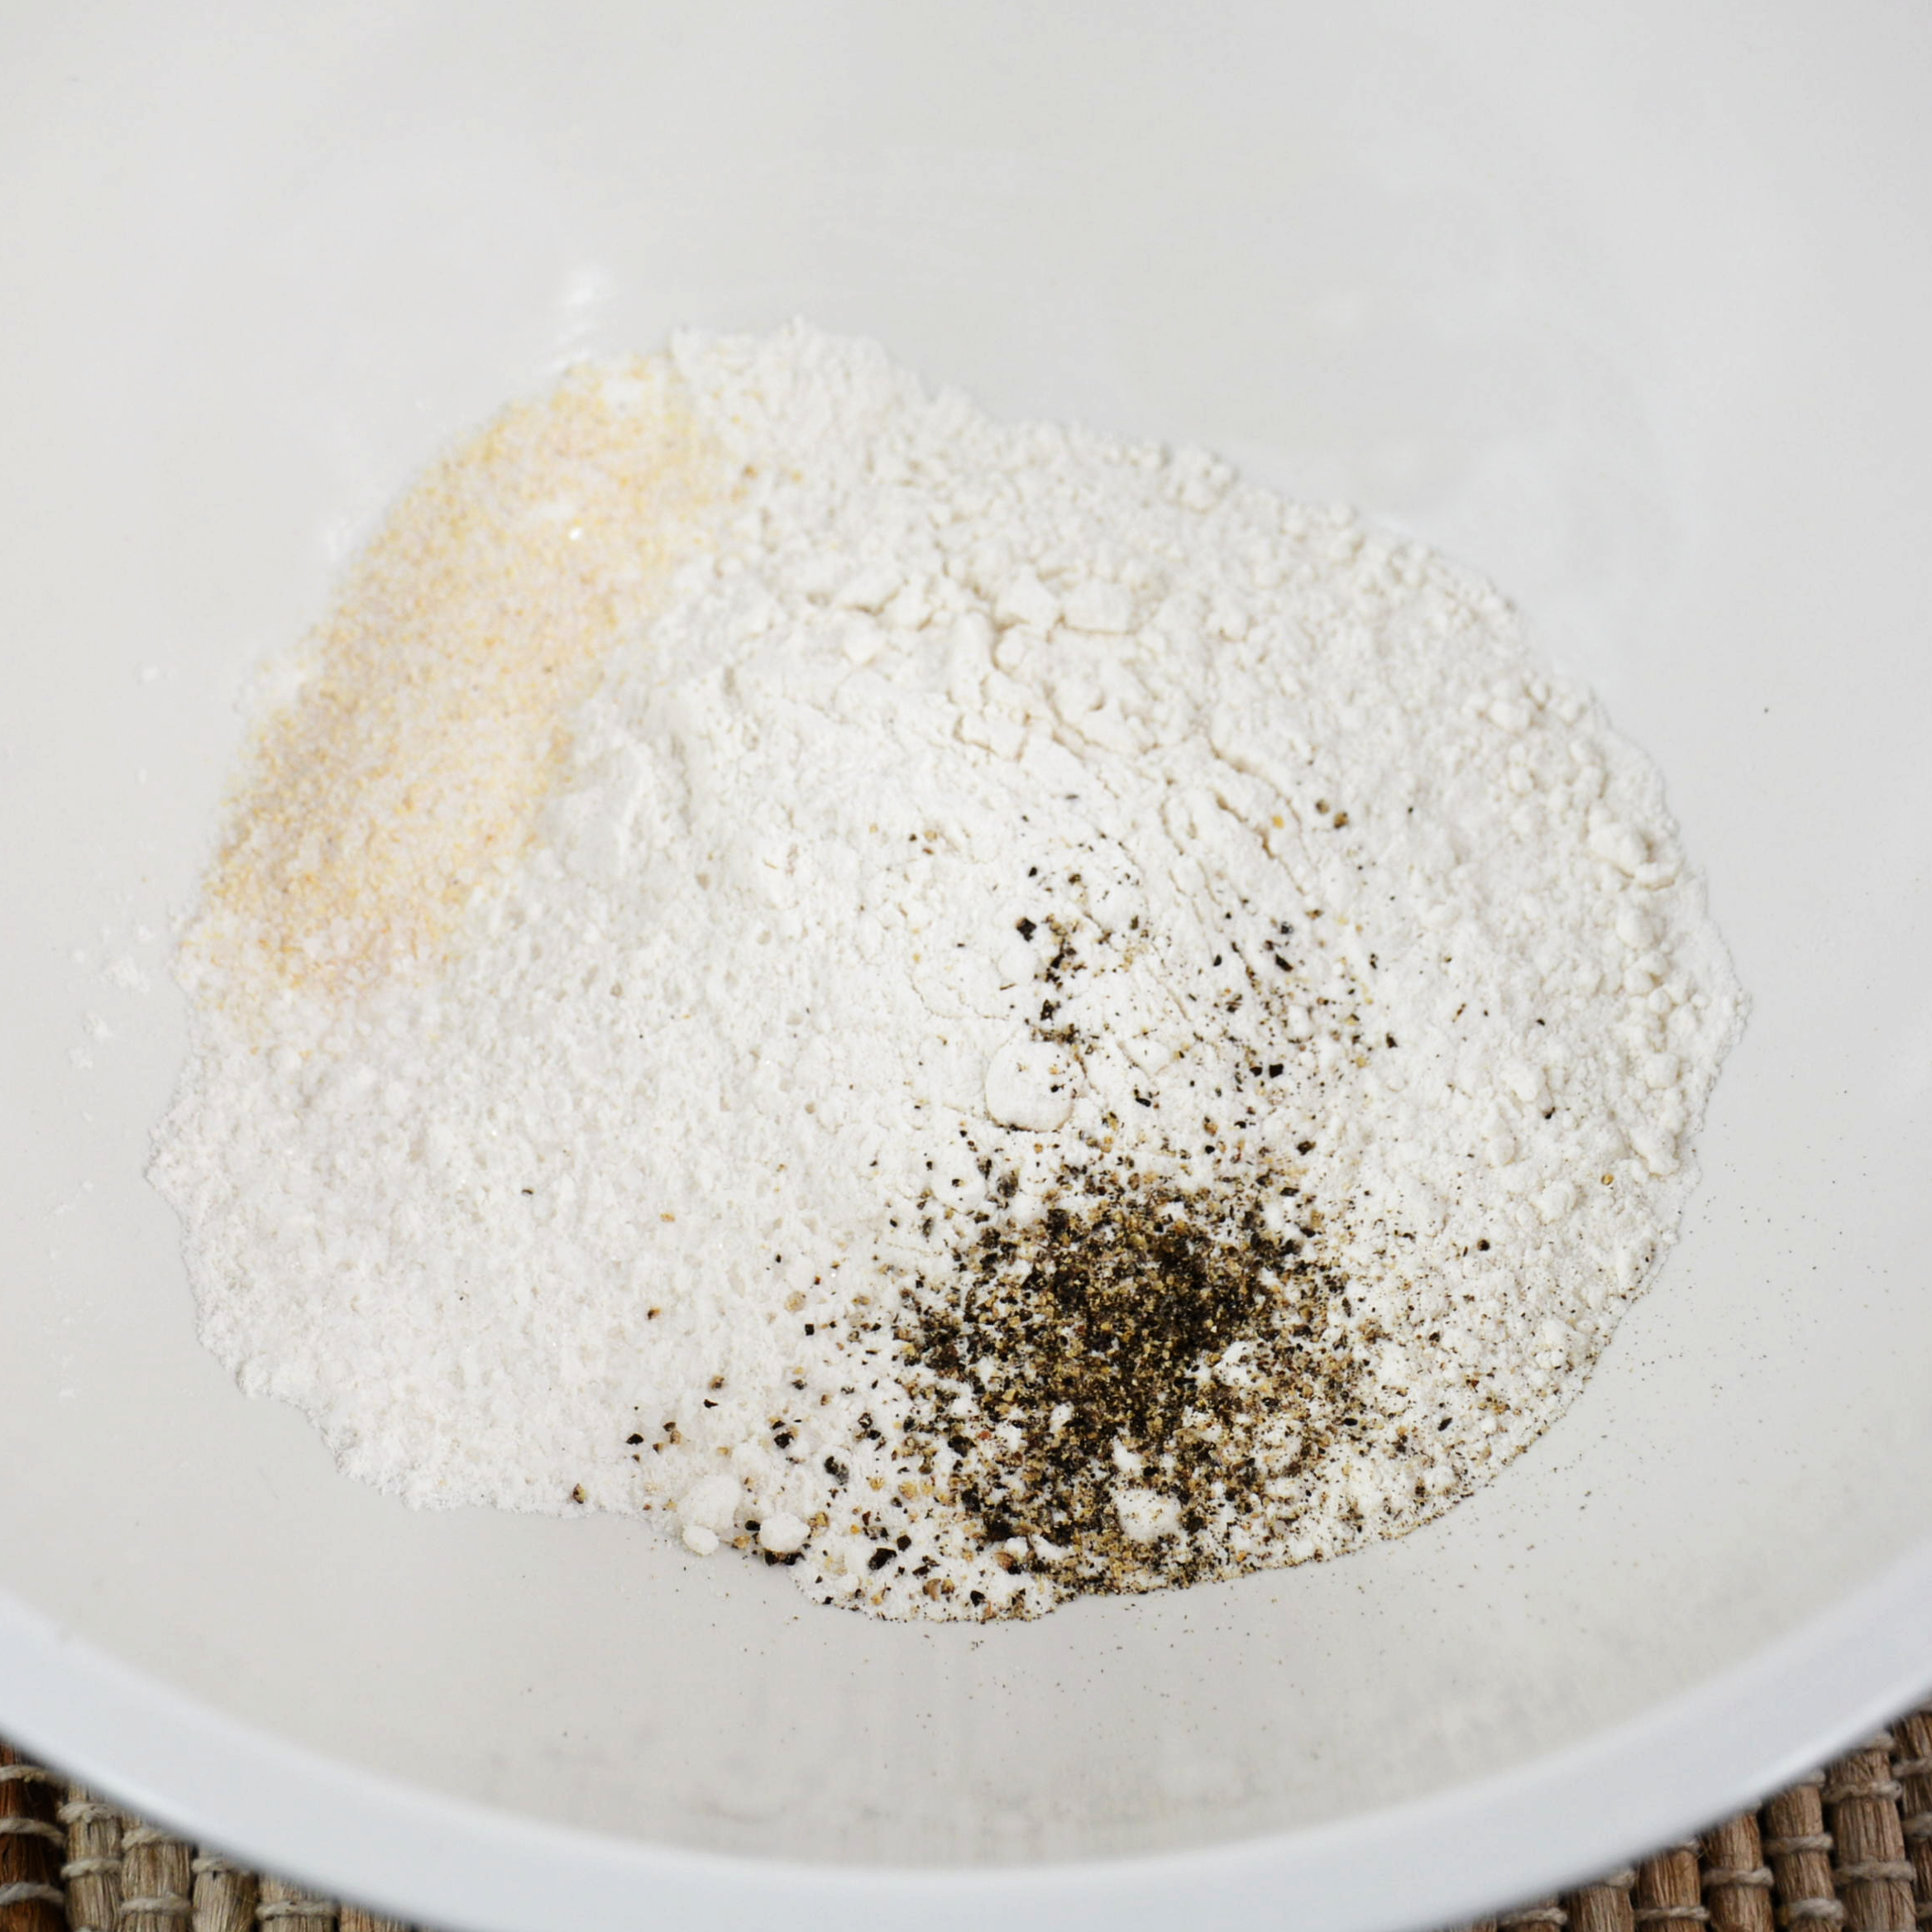 Combine flour, garlic salt, and black pepper in a pie plate or shallow dish.